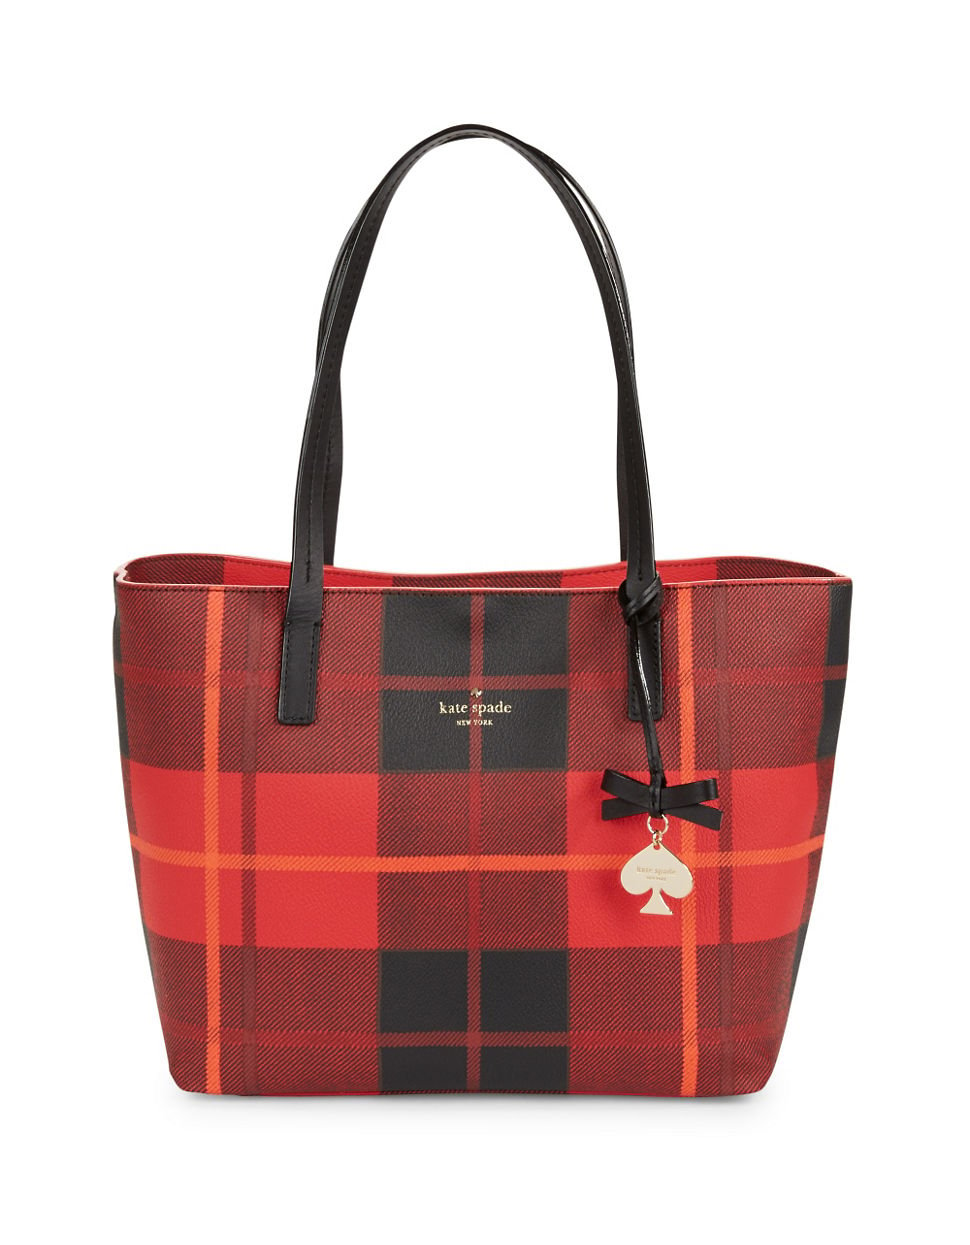 Kate spade Small Ryan Two-tone Plaid Tote in Red (Cherry) | Lyst